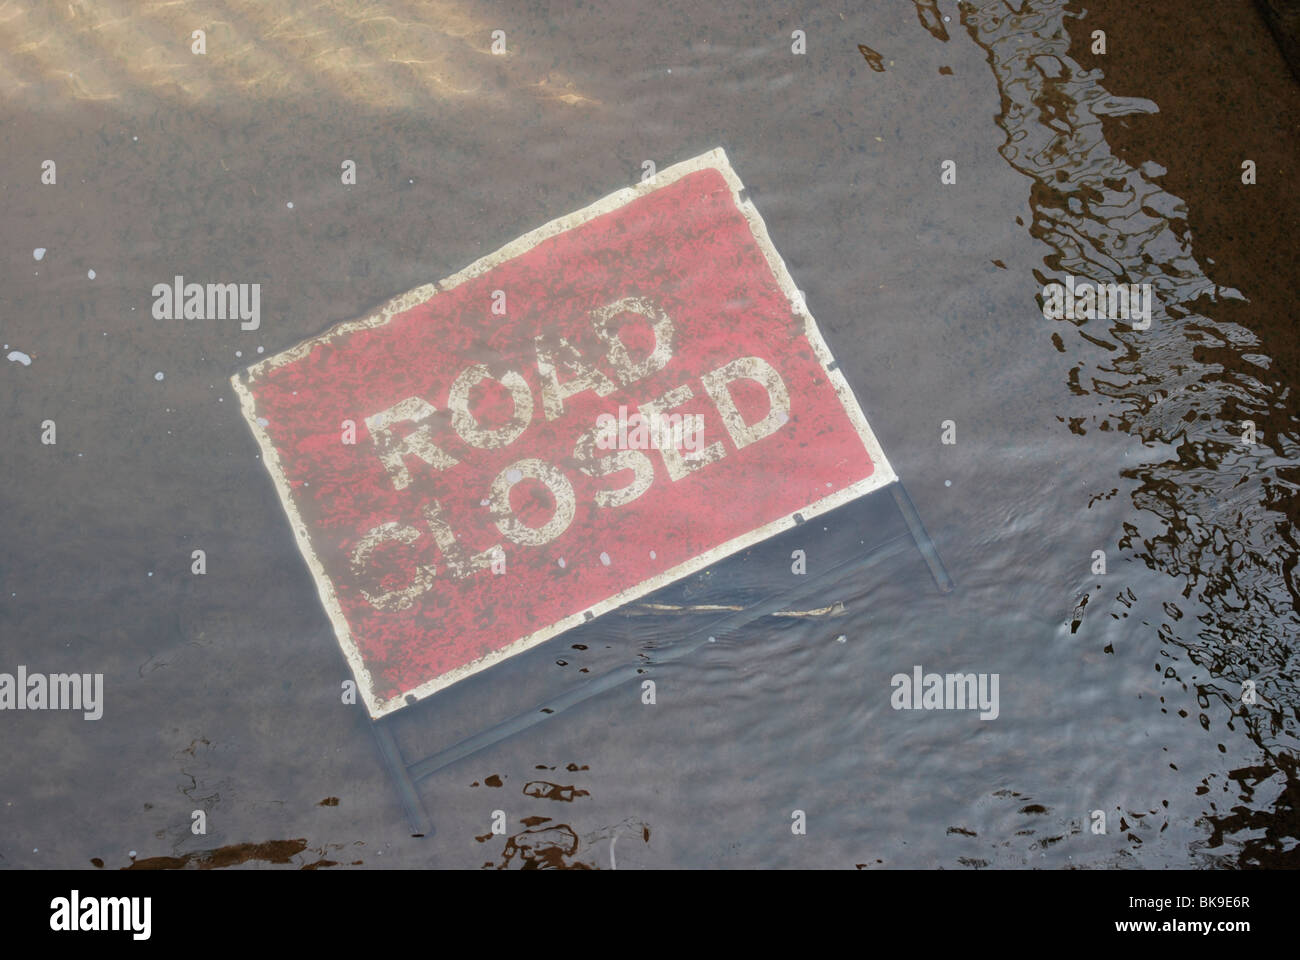 Road closed sign submerged under water. Flooding causing infrastructure and transport problems. Stock Photo